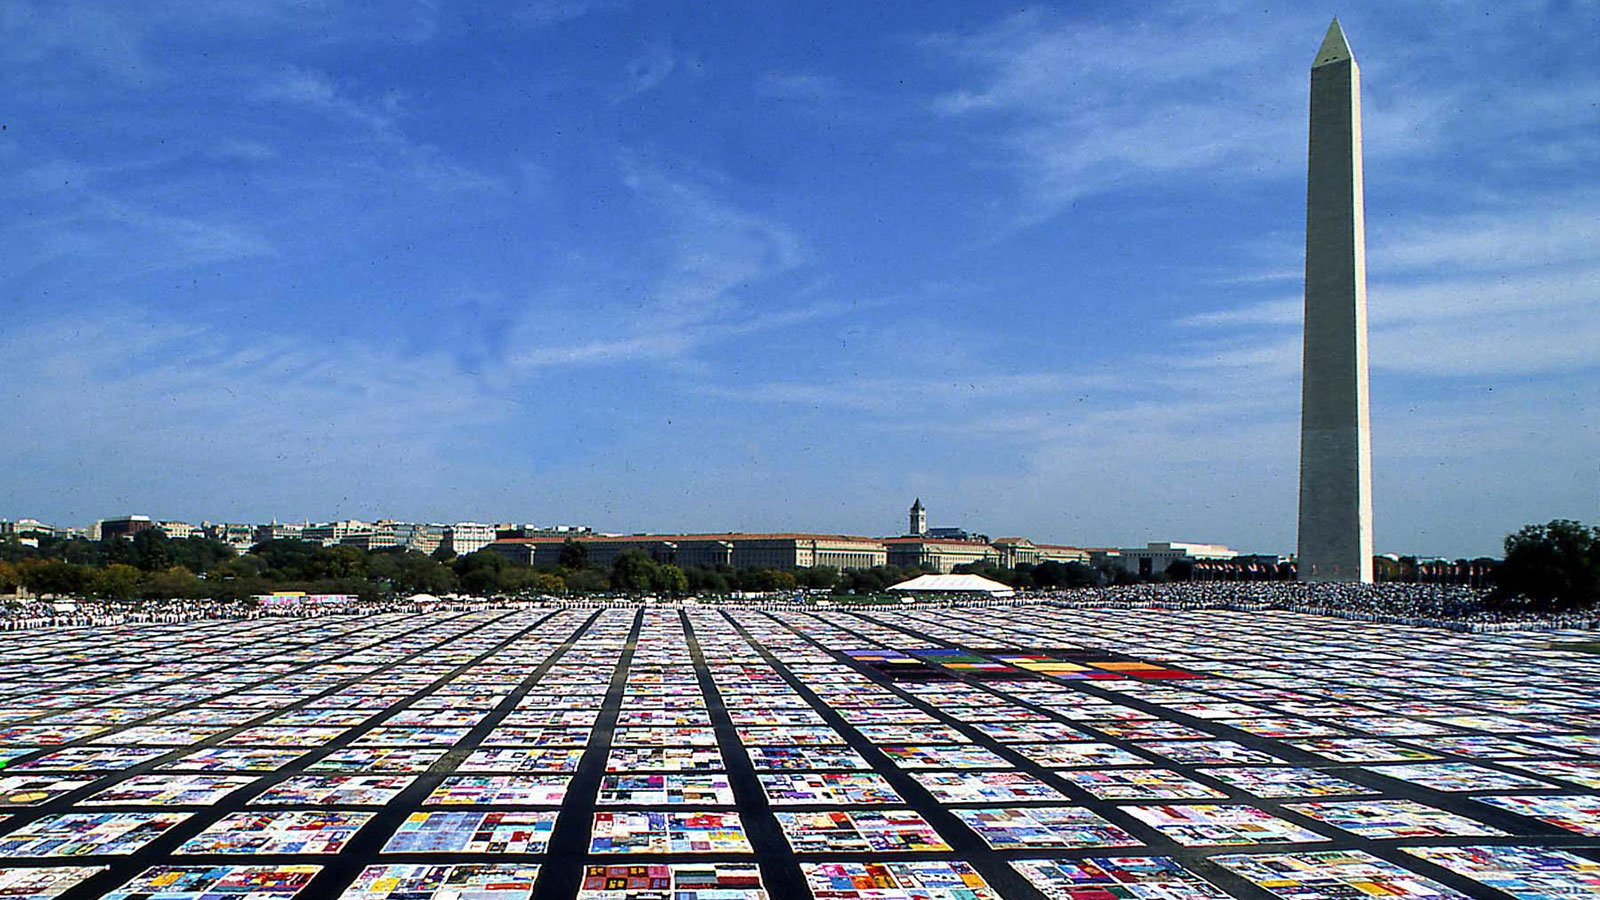 The AIDS Memorial Quilt on display on the National Mall in Washington, D.C.